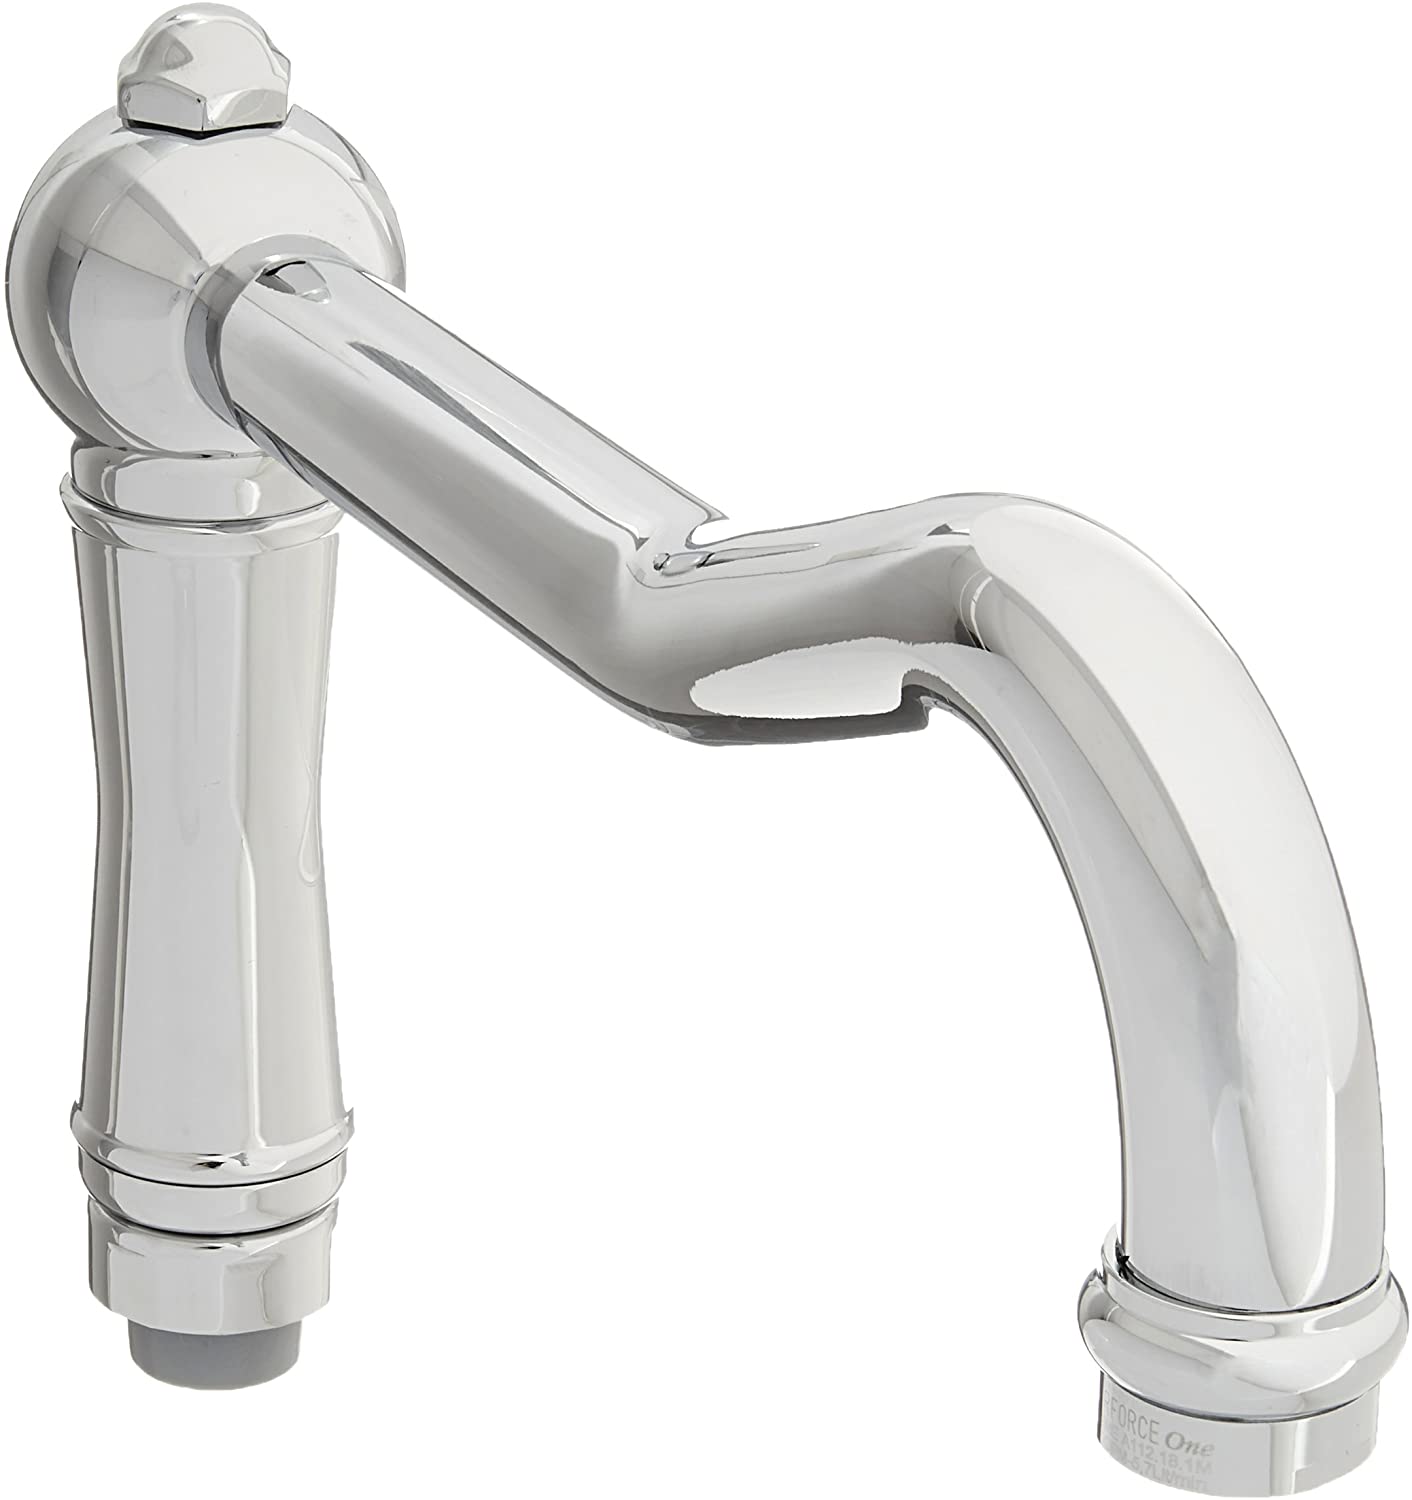 11" Extended Reach Column Spout in Polished Chrome